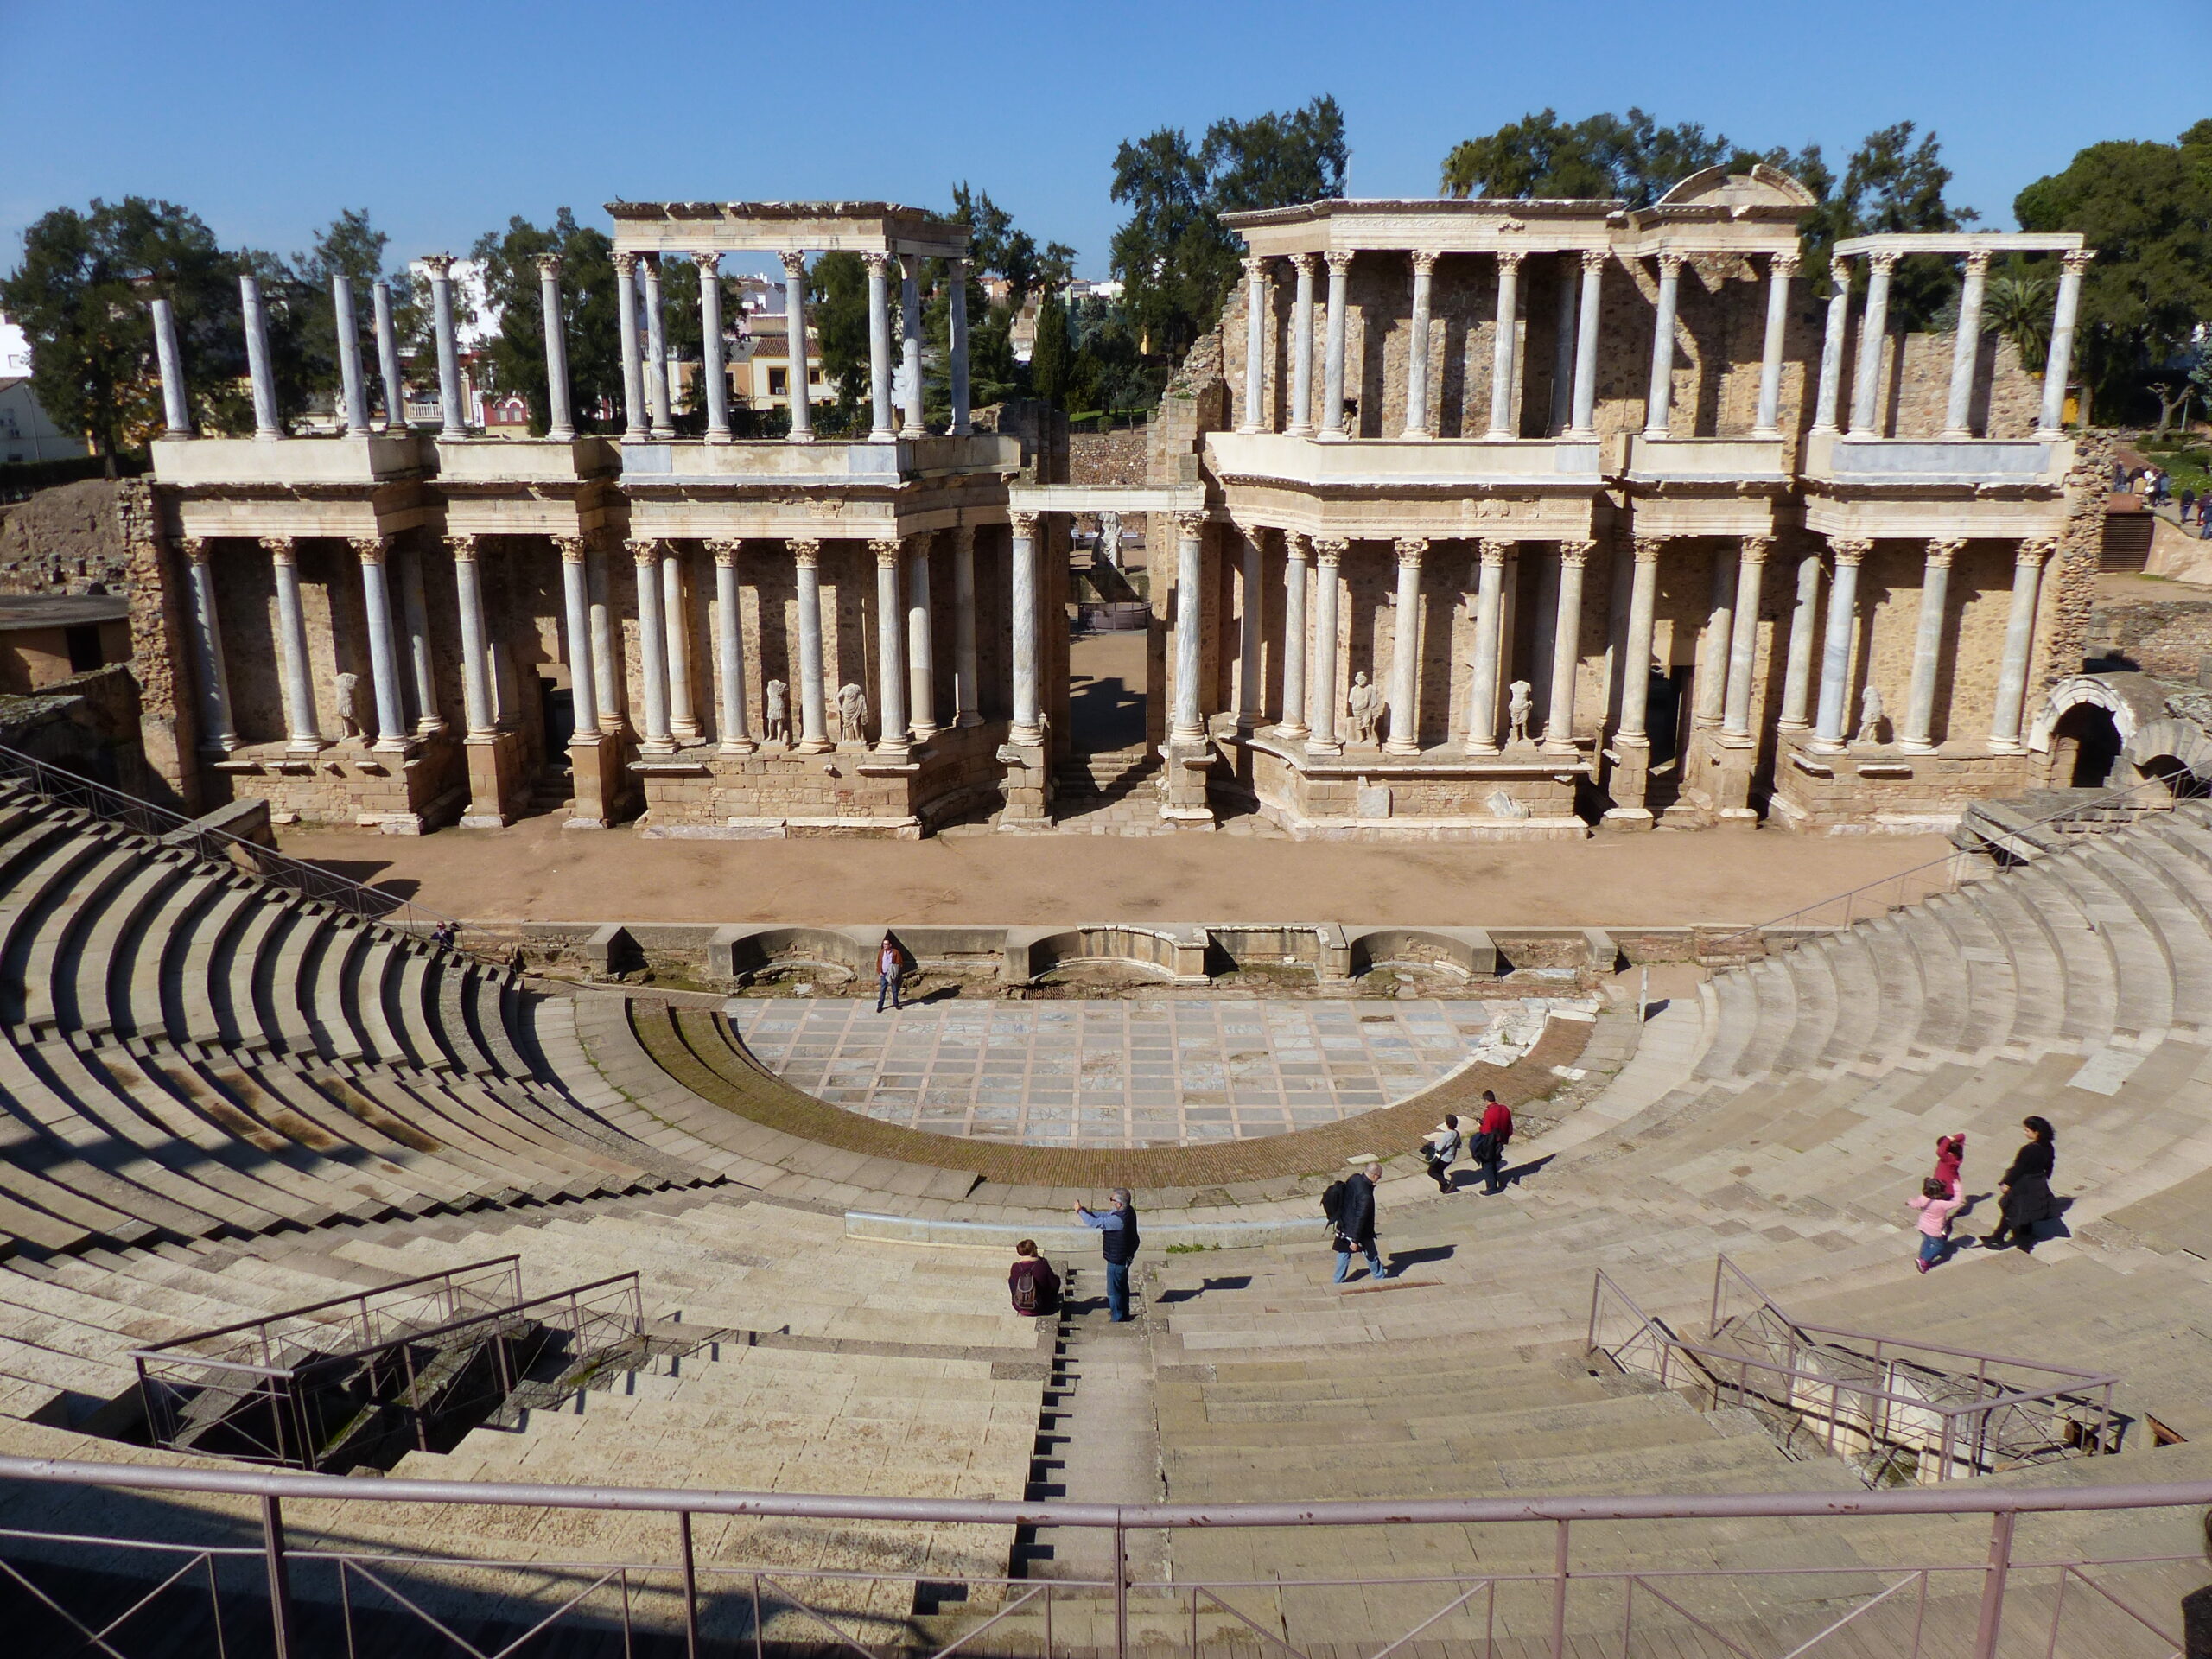 Mérida was listed as a UNESCO World Heritage site in 1993. Roman theater, Mérida (Emerita Augusta), Spain, built in 16/15 B.C.E. and remodeled in later centuries, 86.63 m diameter (photo: Benjamín Núñez González, CC BY-SA 4.0)